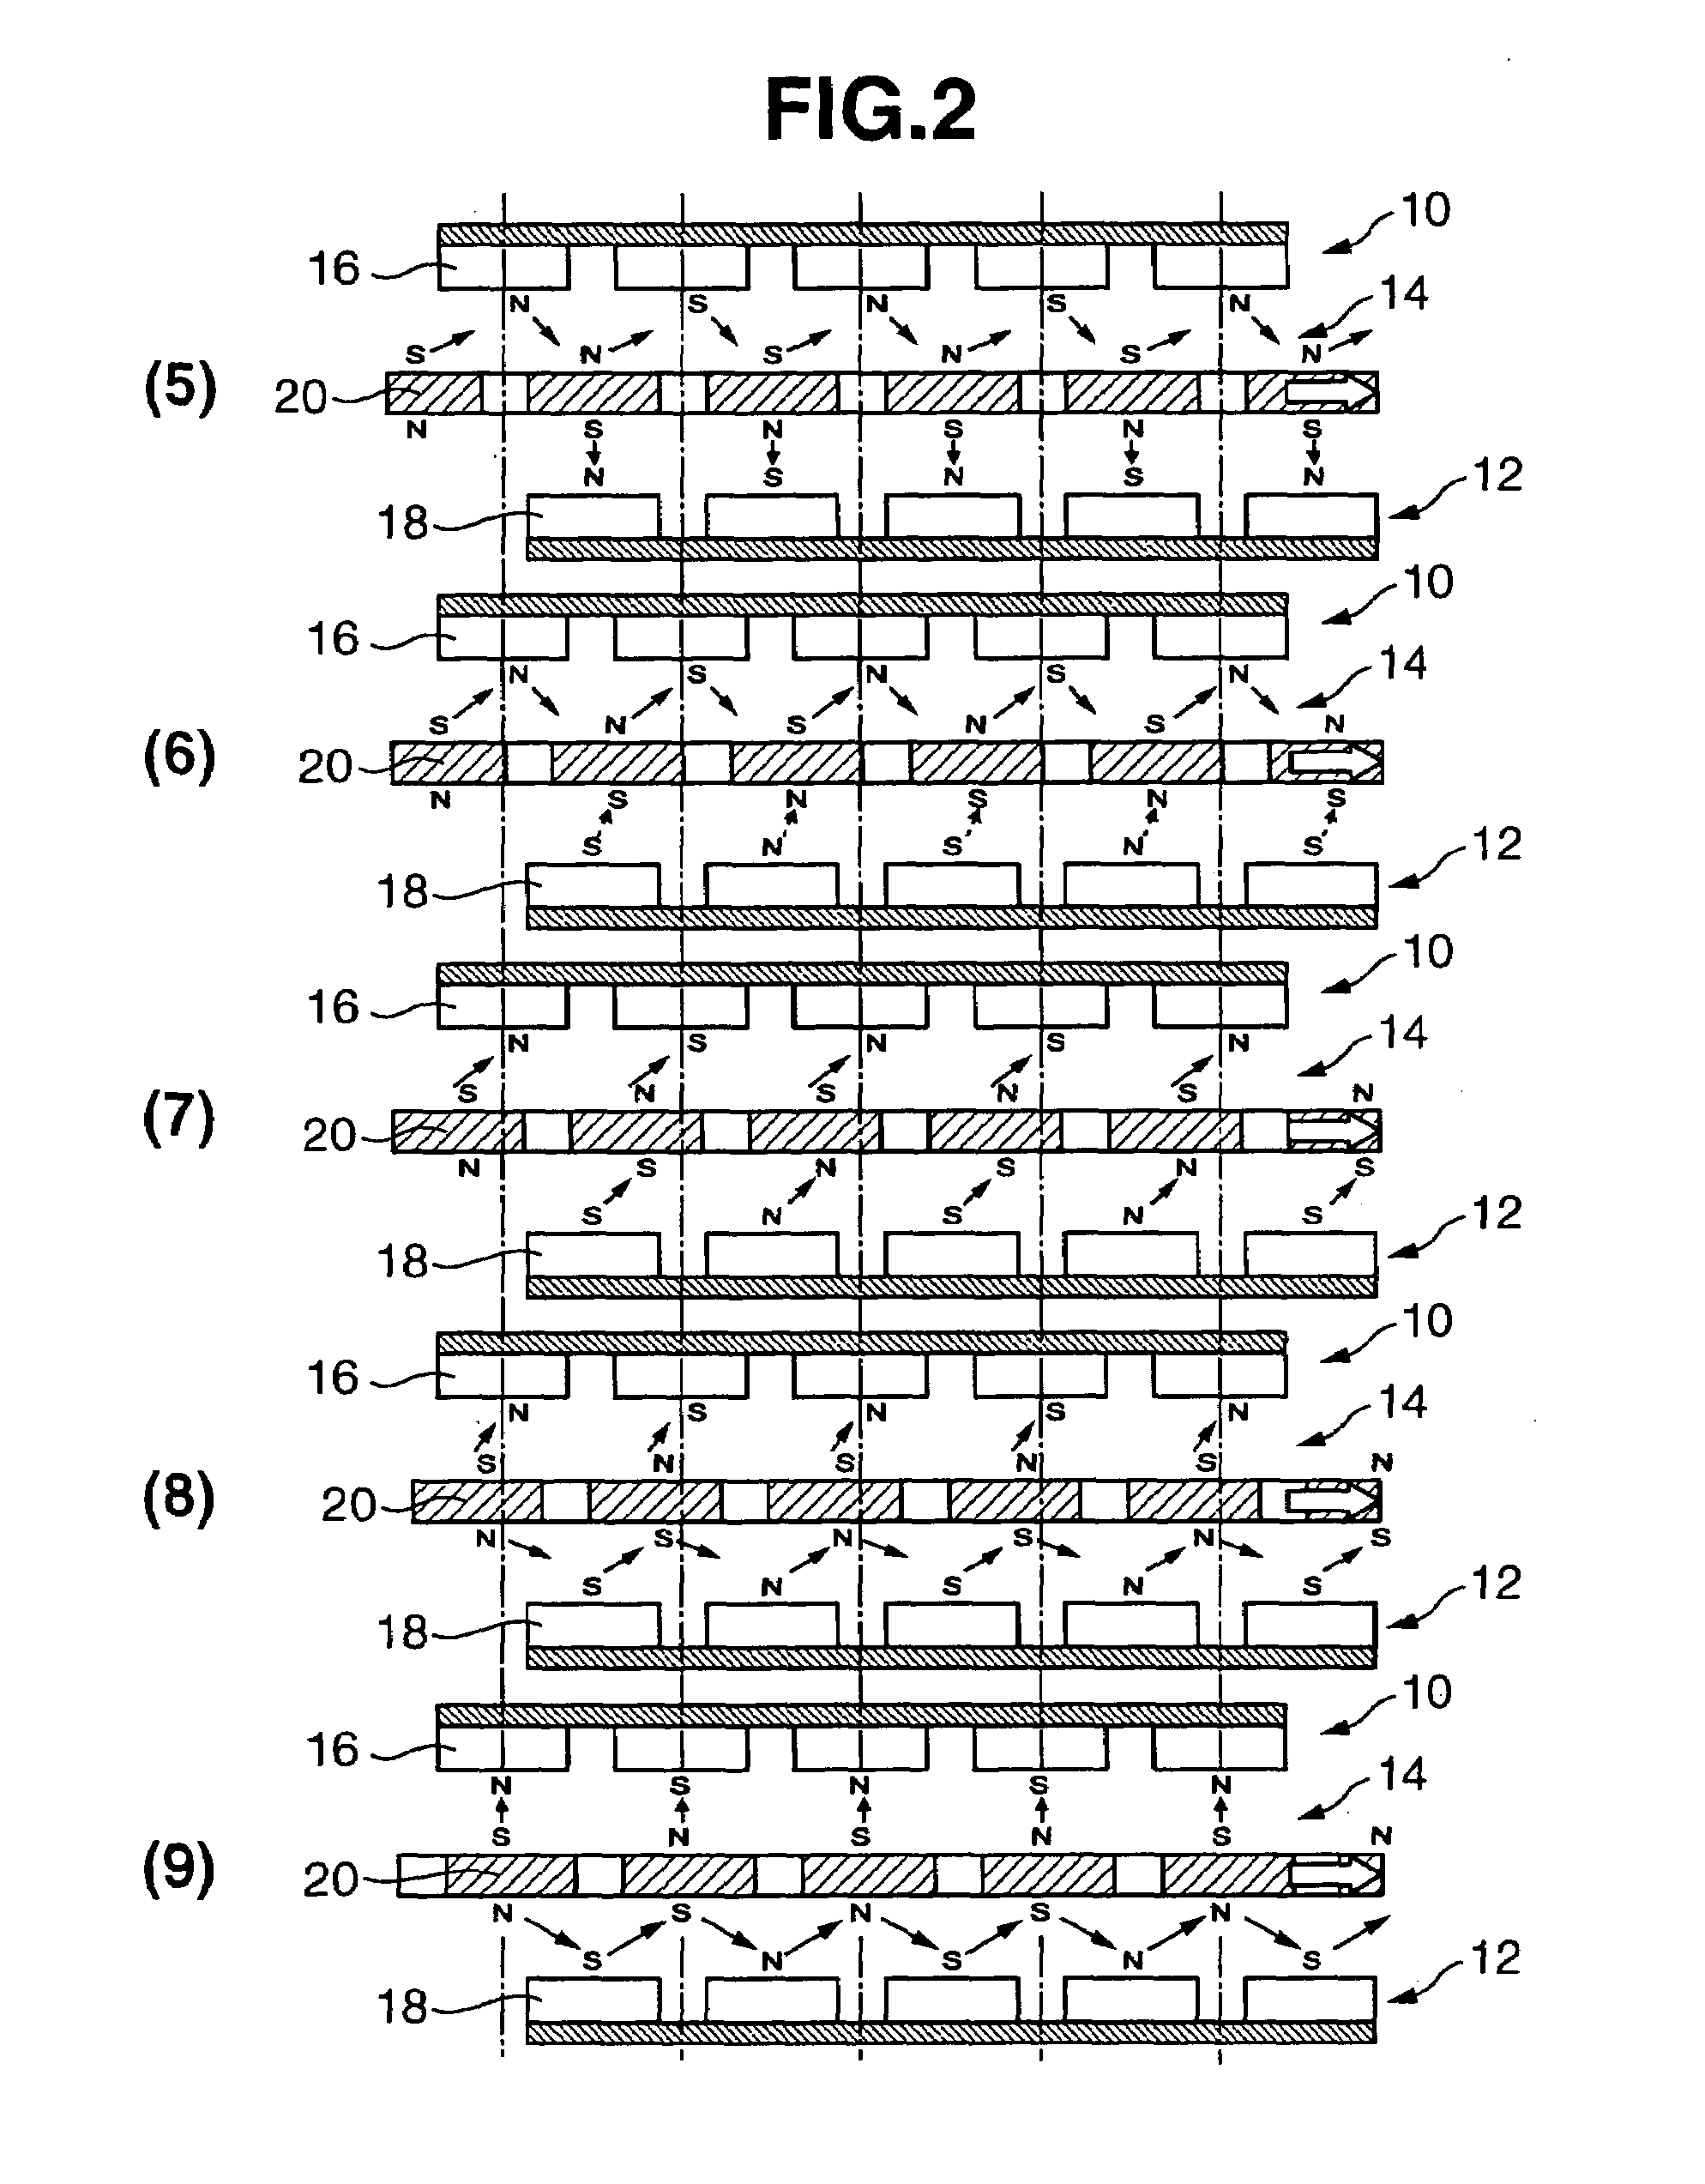 Motor and drive control system thereof